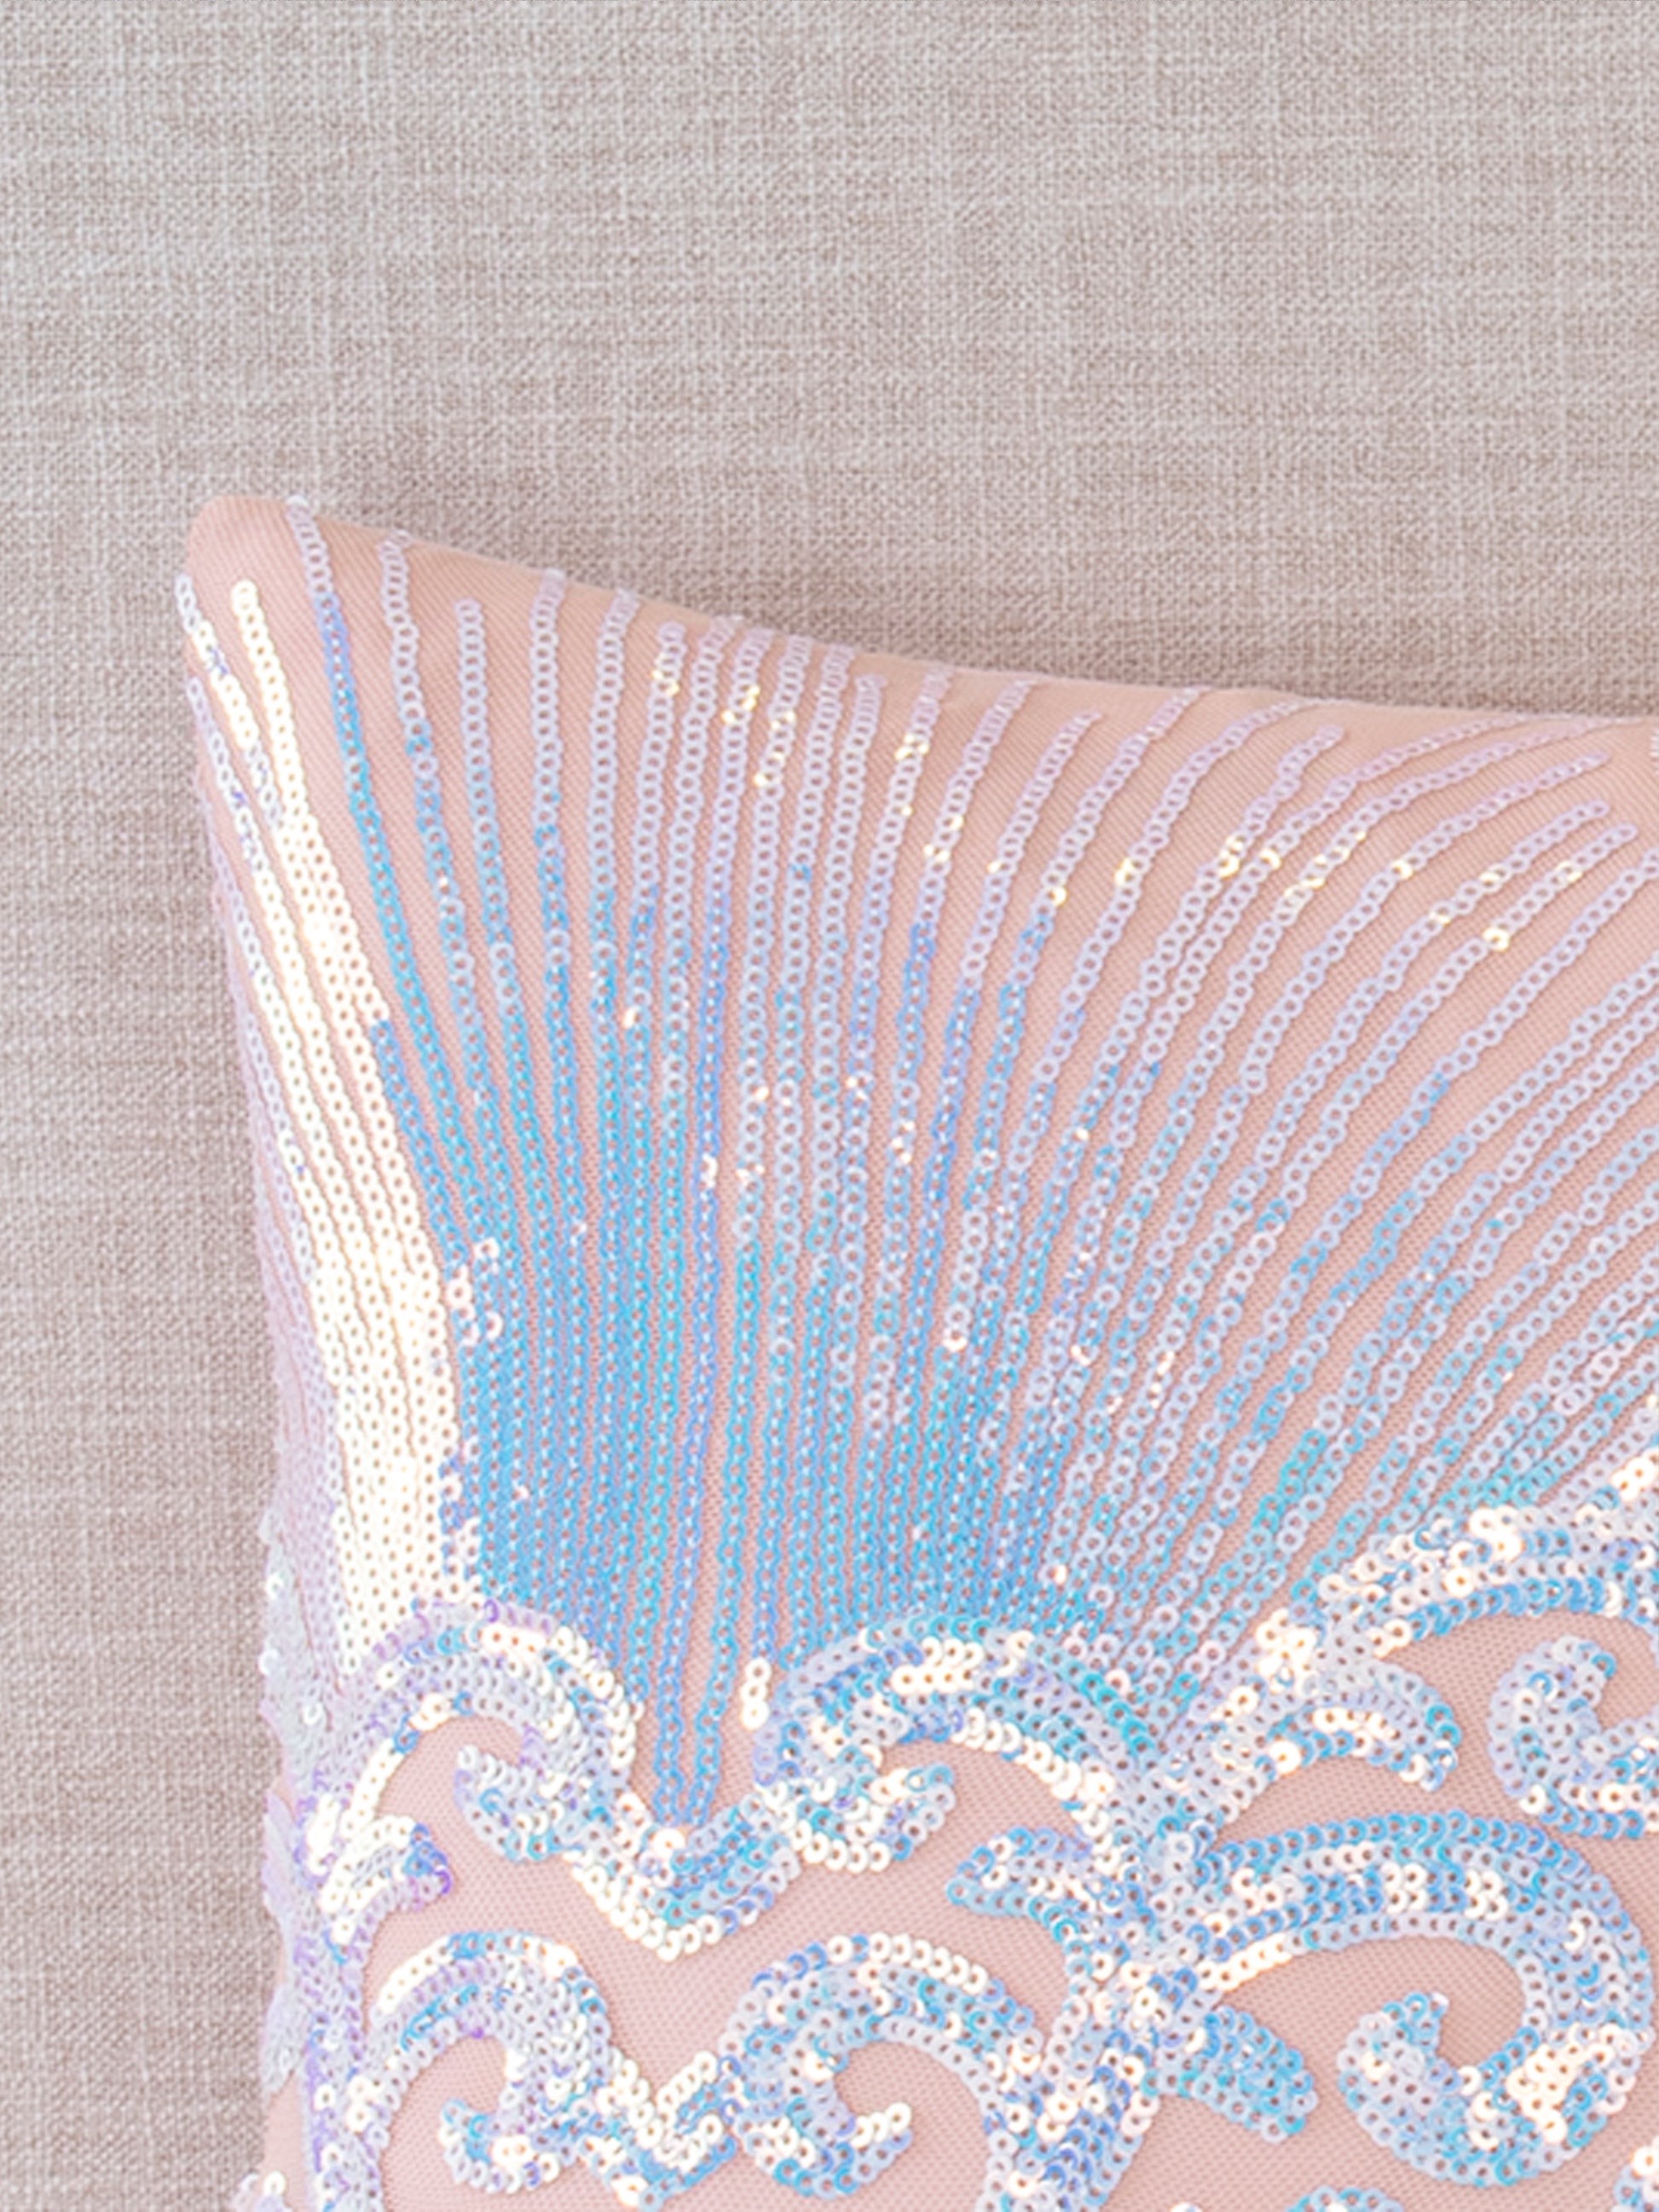 Angel Collection Sequin Decorative Throw Pillow Covers – PRogieneHOME